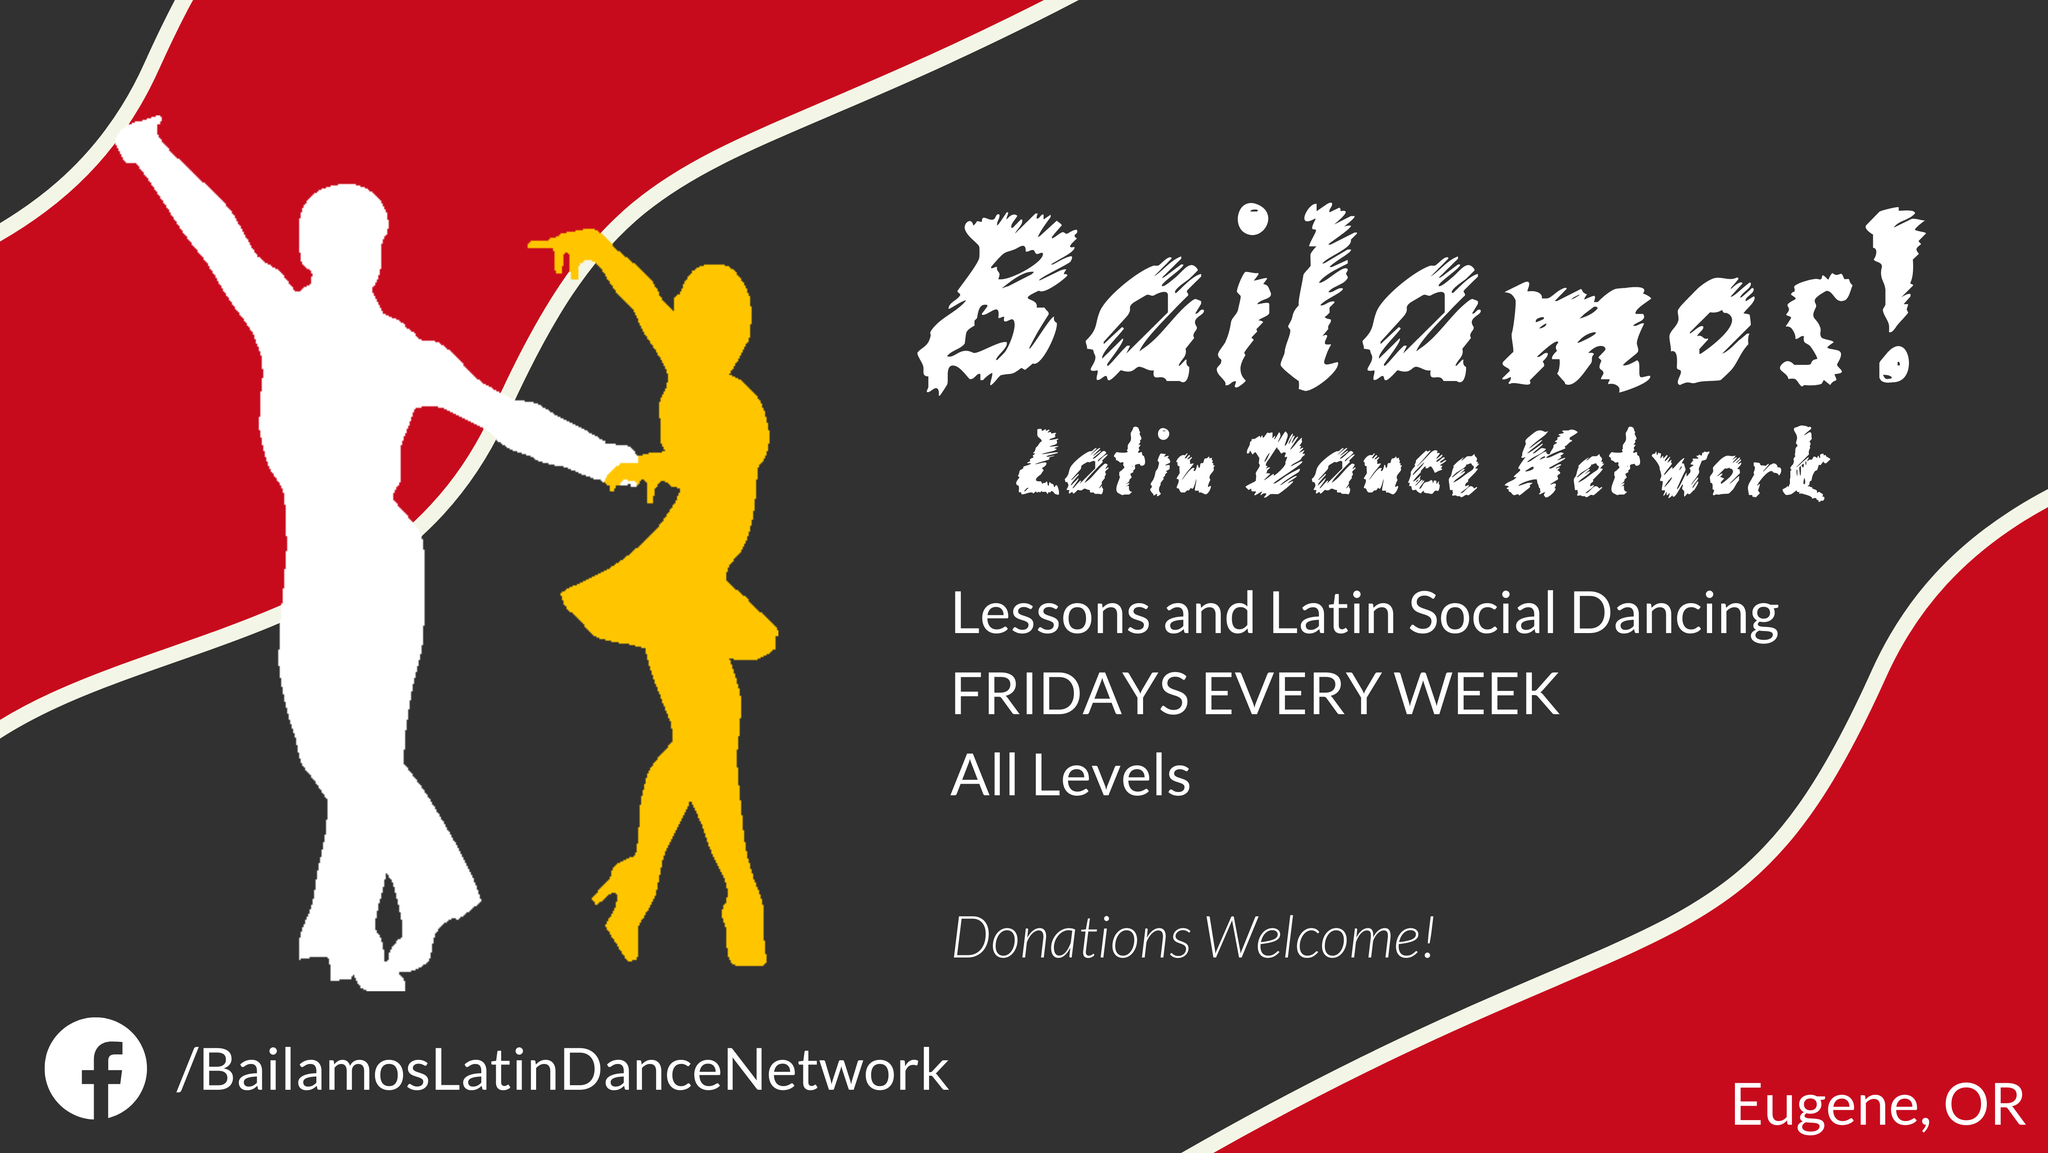 Image of Bailamos! Latin Dance Network with silhouetted dancers in white and yellow over red waving stripes and a gray background. Additional text reads, "Lessons and Latin Social Dancing. FRIDAYS EVERY WEEK. All Levels. Donations Welcome. Facebook.com/BailamosLatinDanceNetwork, Eugene, OR"